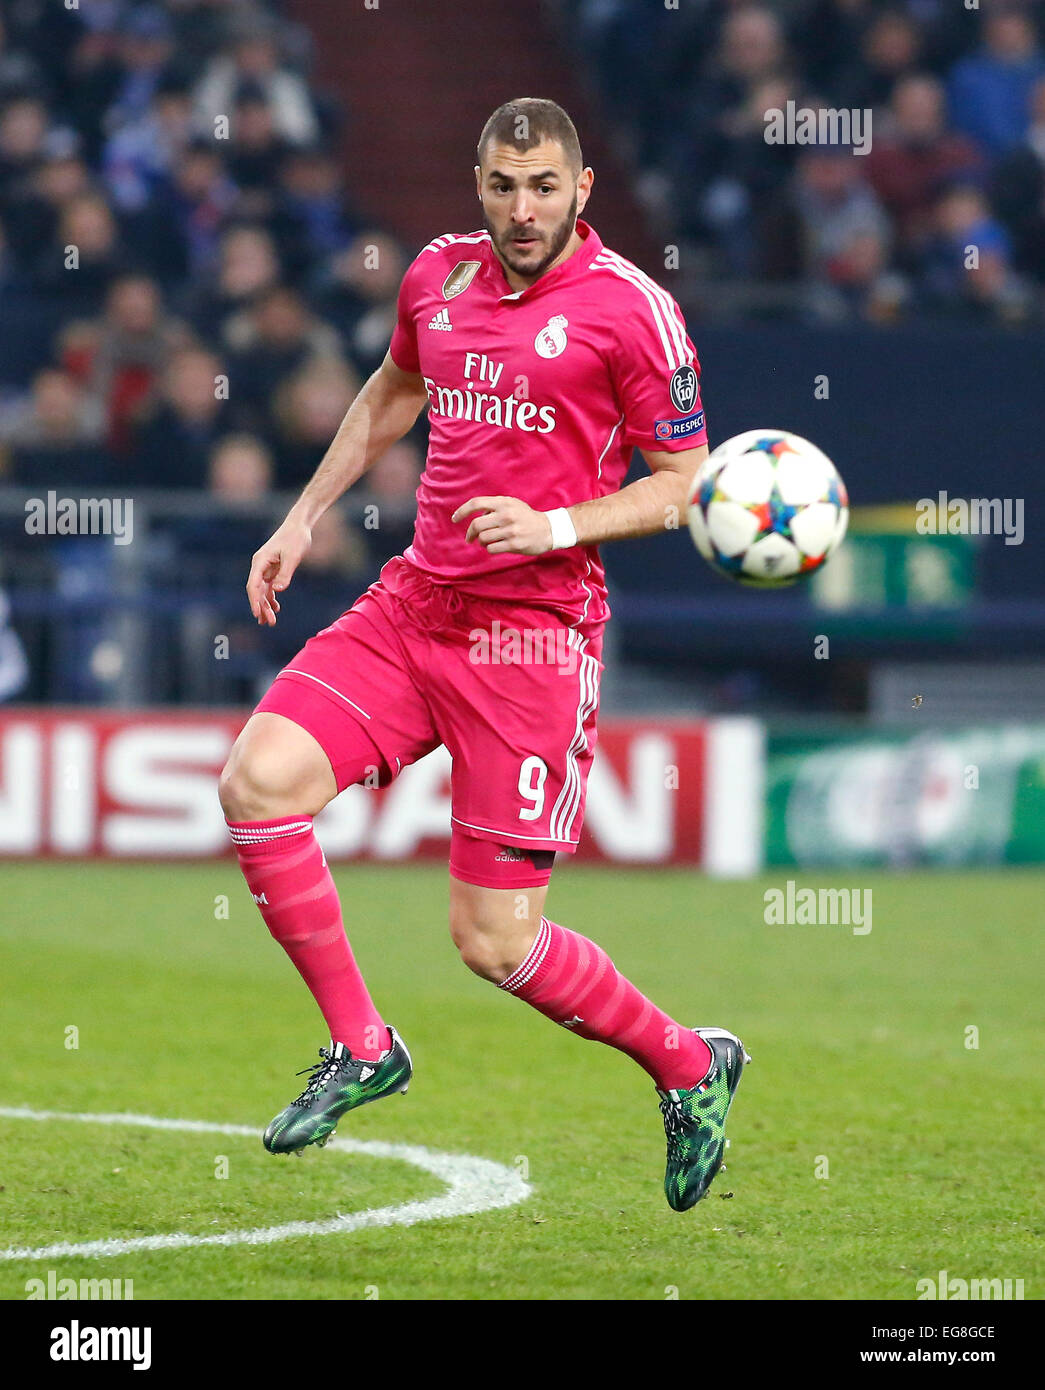 Karim Benzema (Real Madrid) during the Champions League match between FC  Schalke 04 and Real Madrid, Veltins Arena in Gelsenkirchen on February 18.,  2015 Stock Photo - Alamy